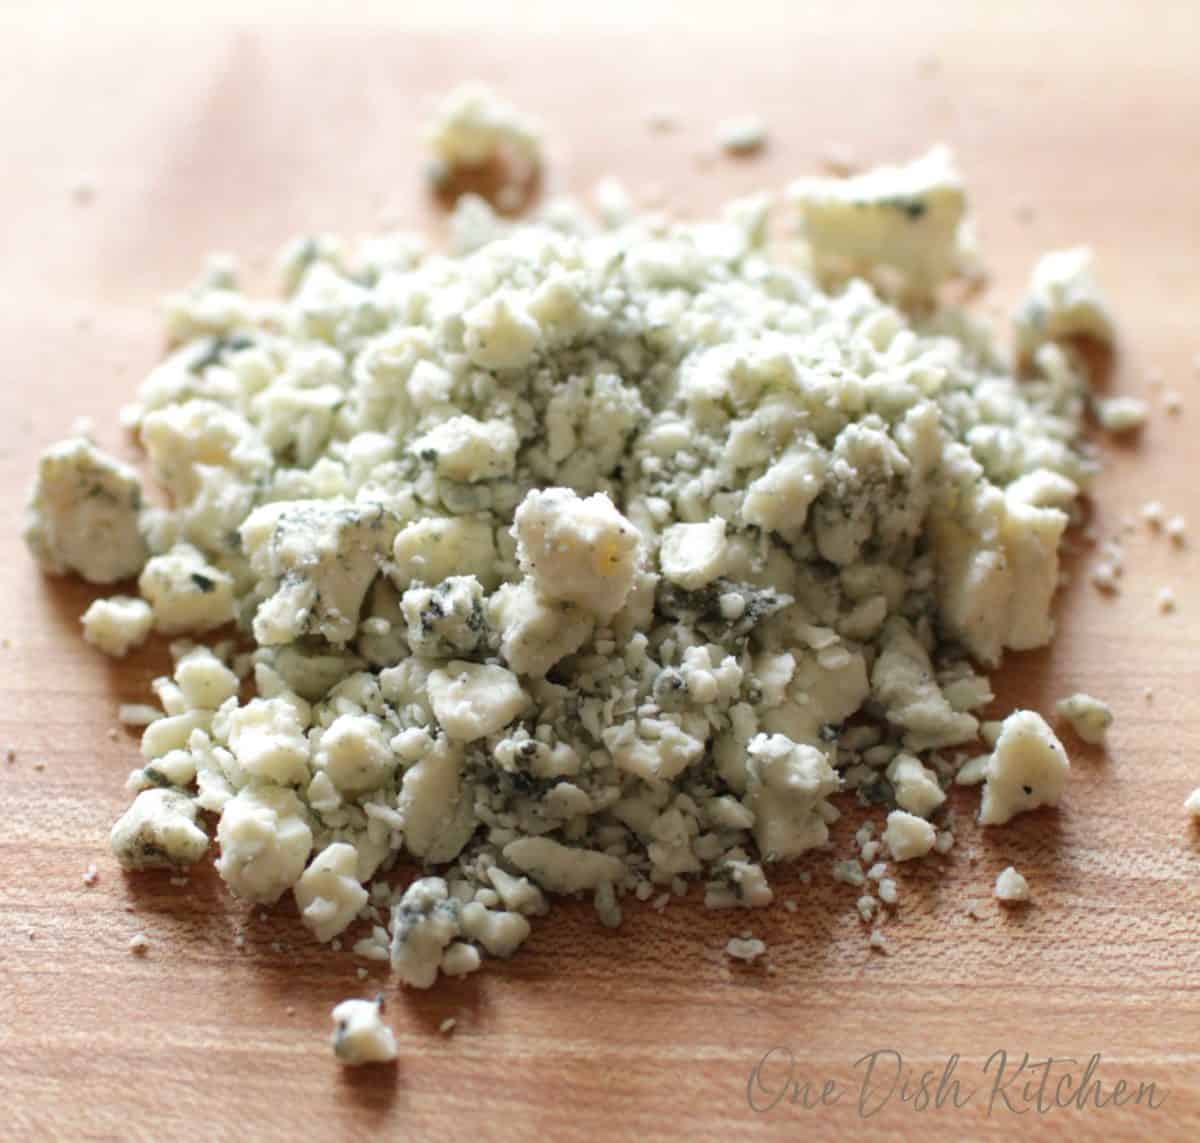 blue cheese crumbles on a brown wooden cutting board.